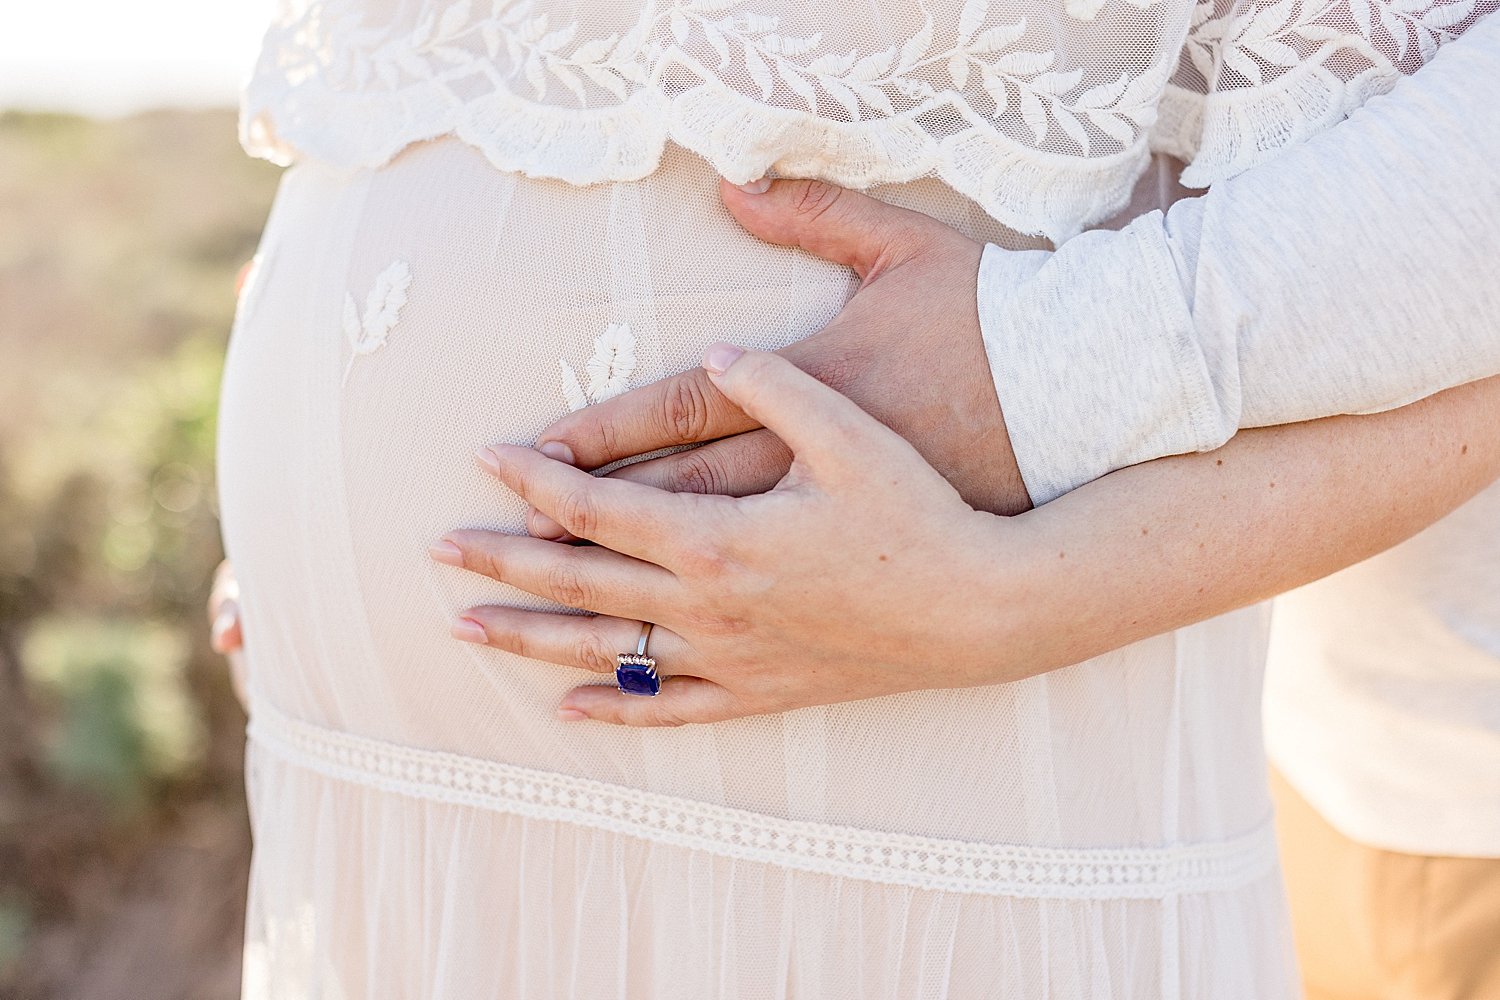 Maternity photoshoot for expecting parents | Ambre Williams Photography